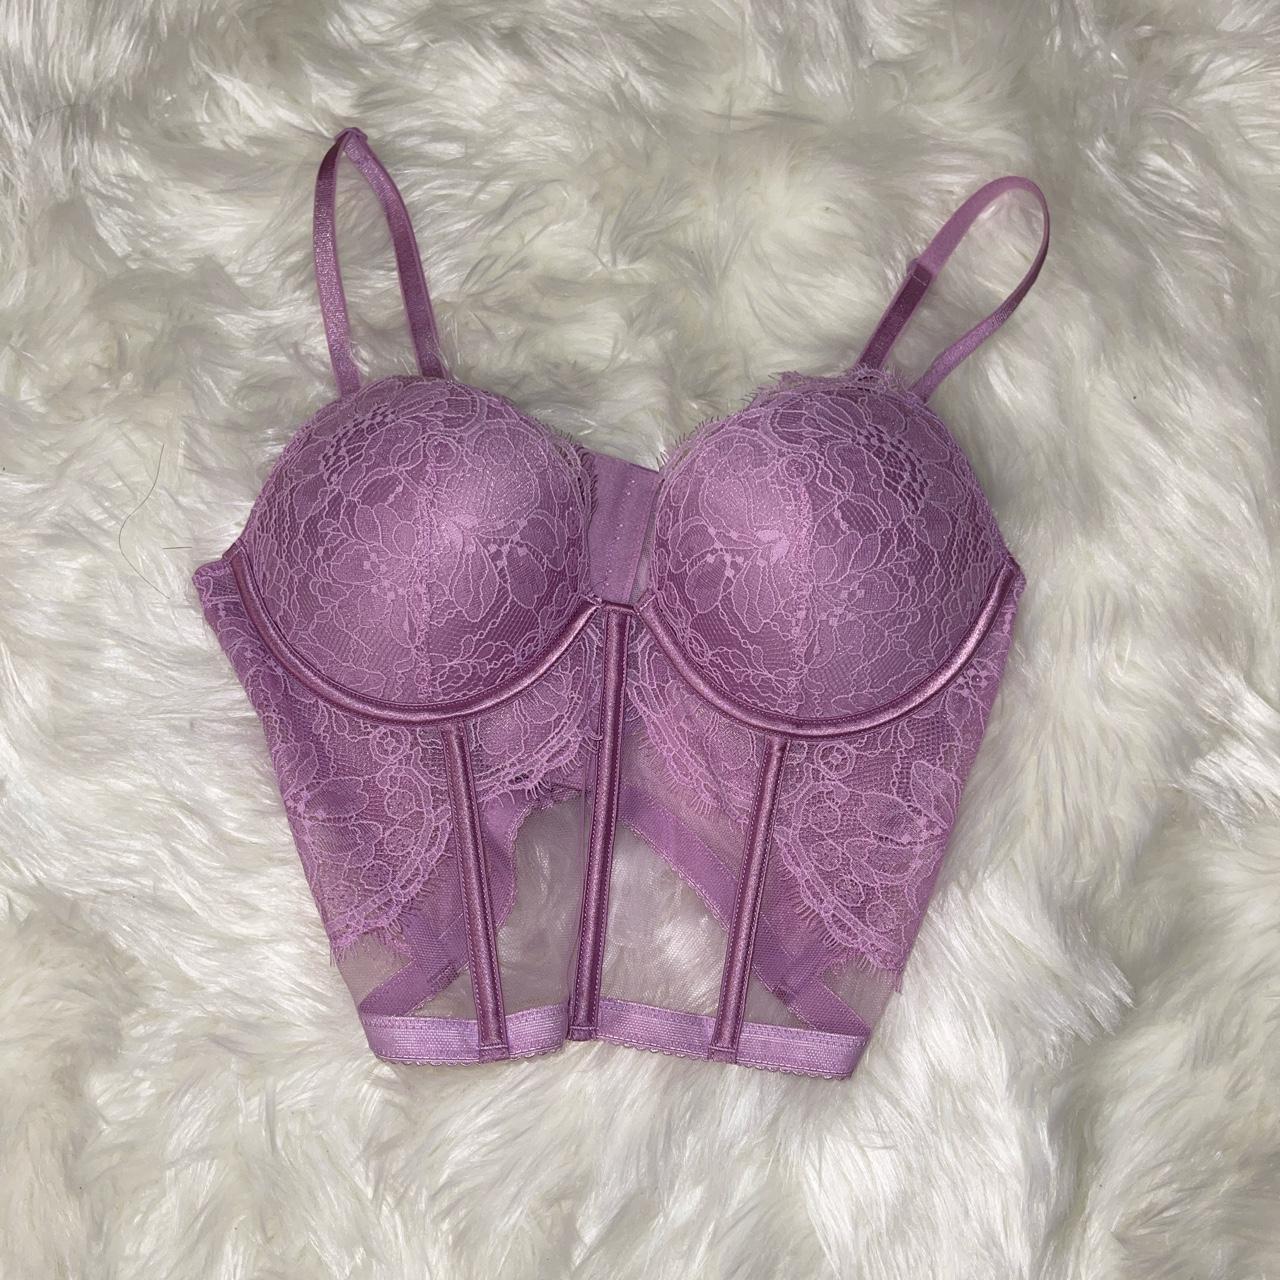 NEW* VS WICKED UNLINED LACE-UP CORSET TOP + PANTY - Depop